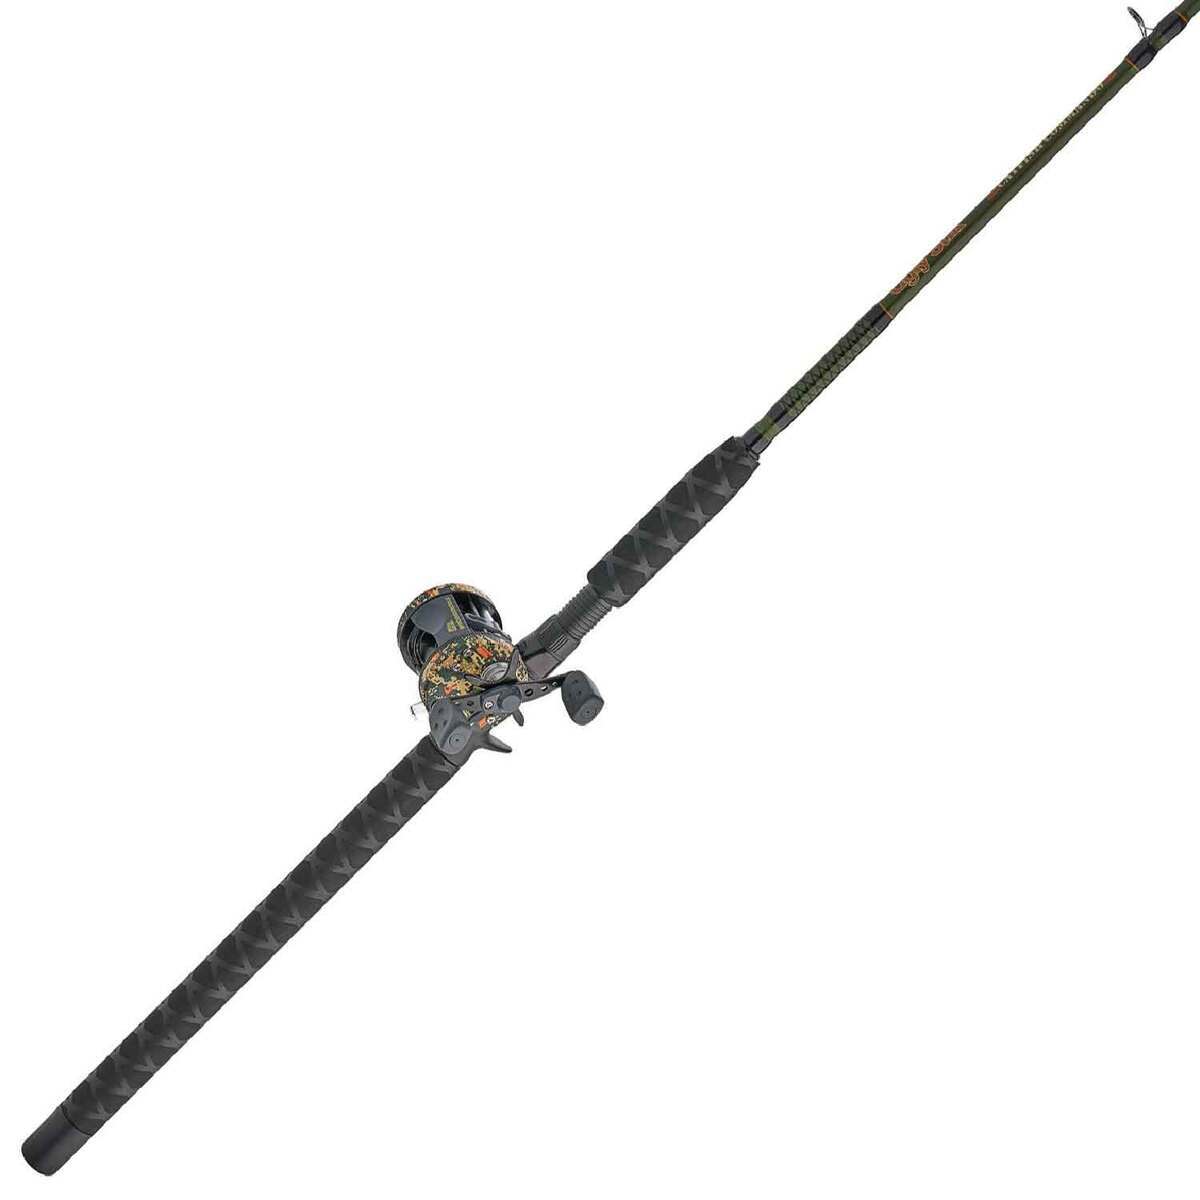 Catfish Commando Cast Combo – Fisherman's Factory Outlet